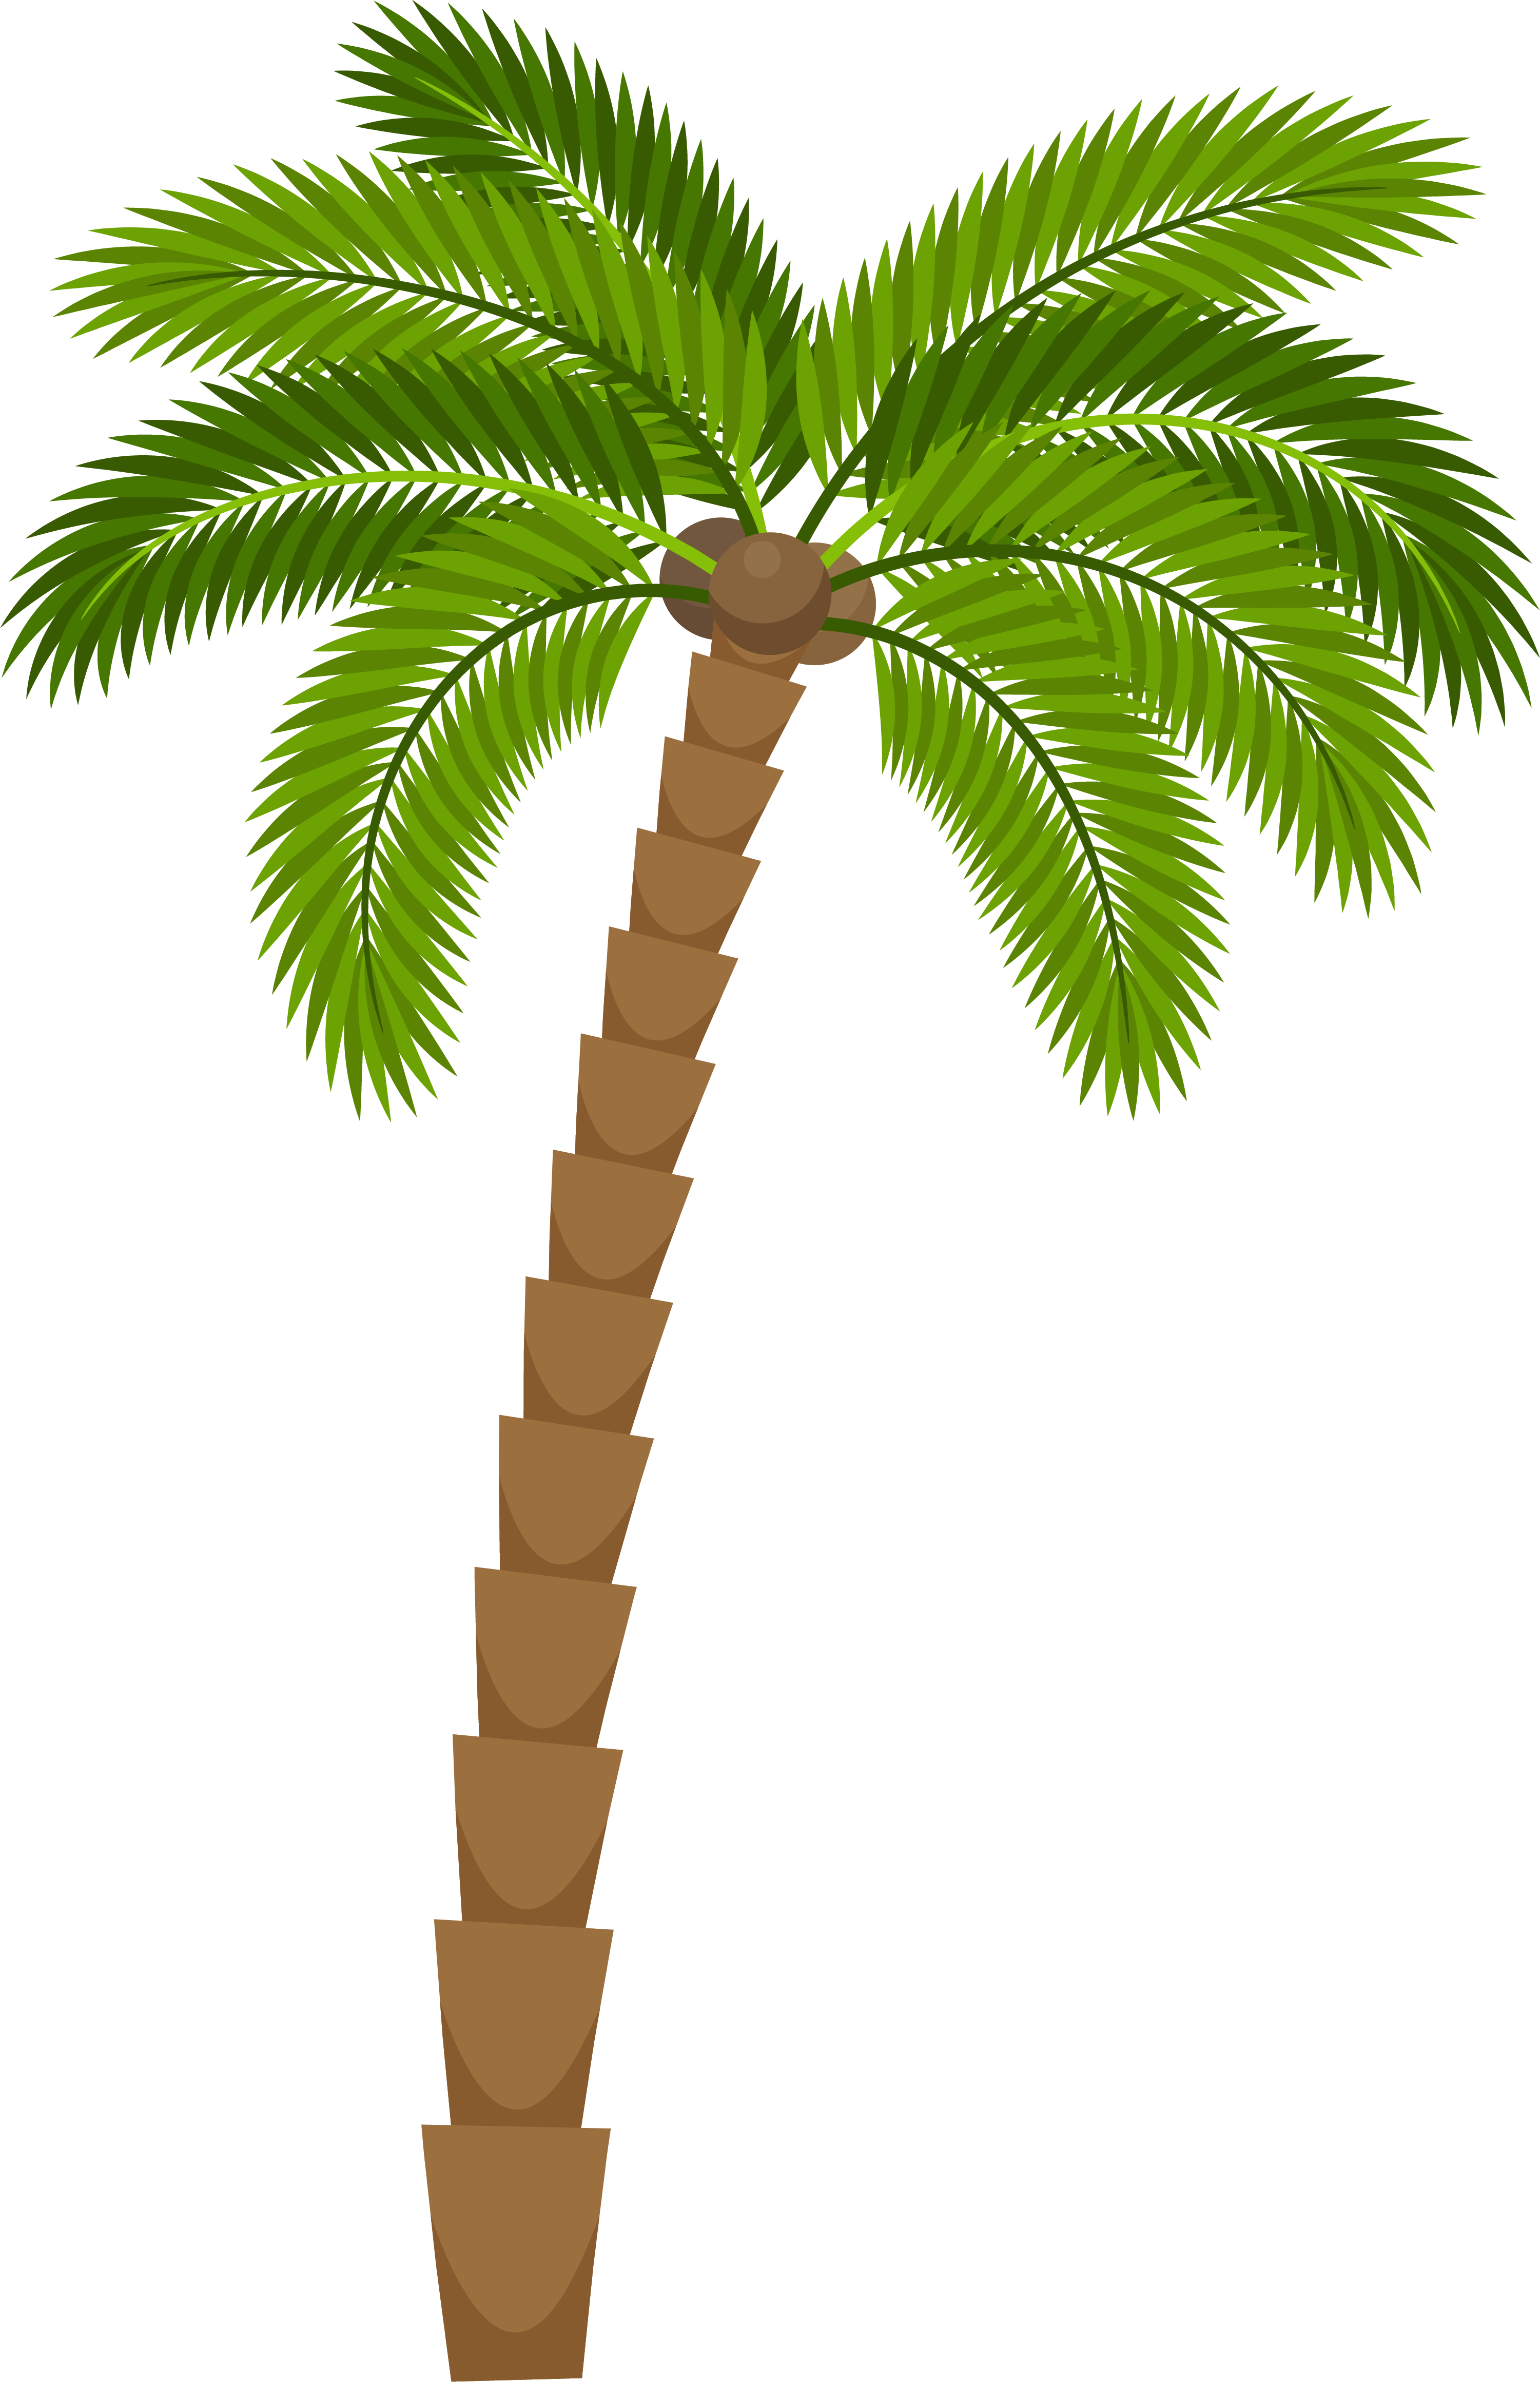 Leaves clipart coconut tree, Leaves coconut tree Transparent FREE for